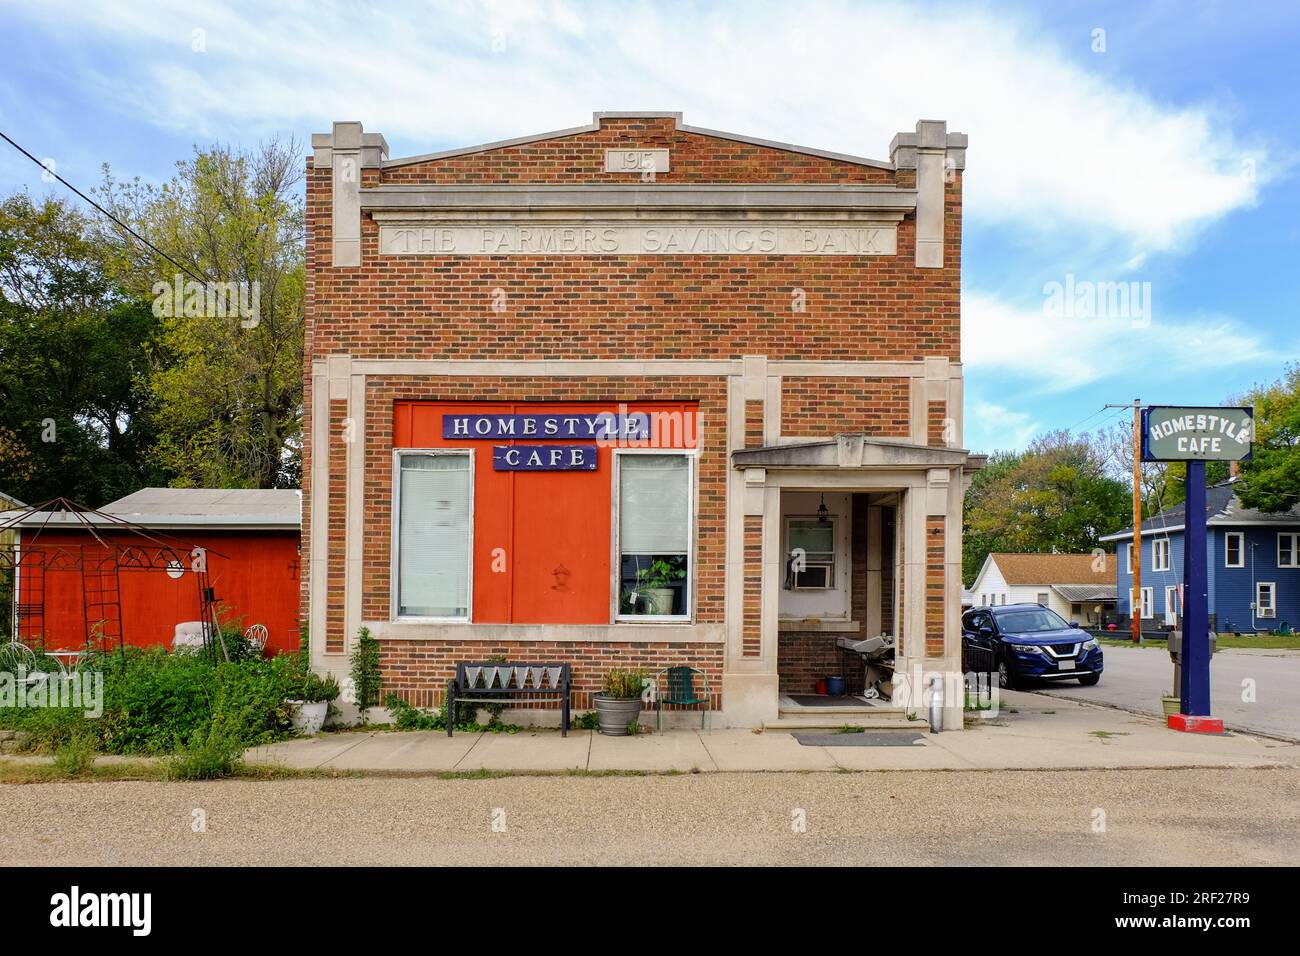 An old building of a former state bank with a sign The Farmers Savings Bank in Brandon, Iowa, United States. Stock Photo